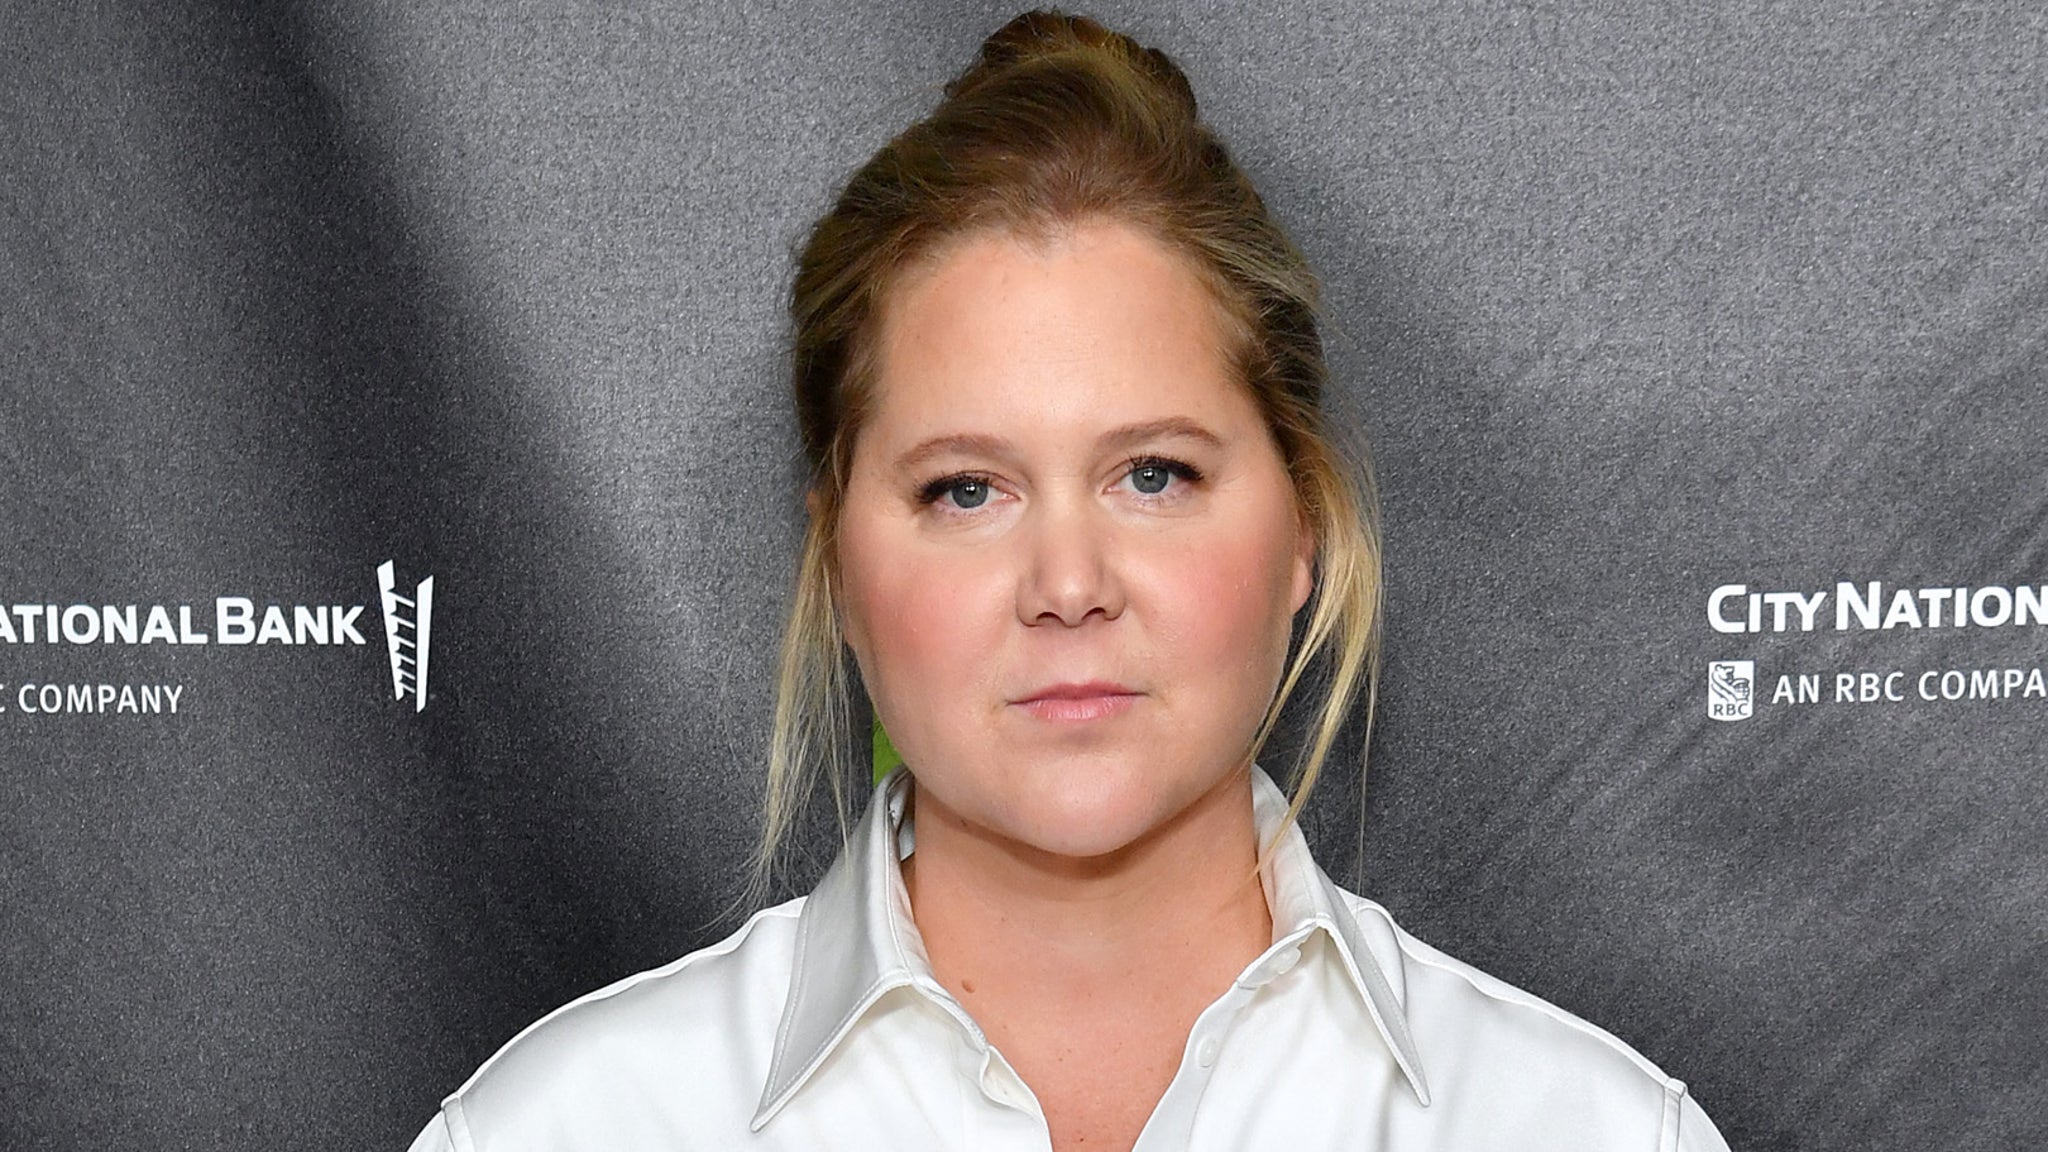 Amy Schumer Reveals She Was Diagnosed with Cushing Syndrome After Comments About 'Puffier' Face